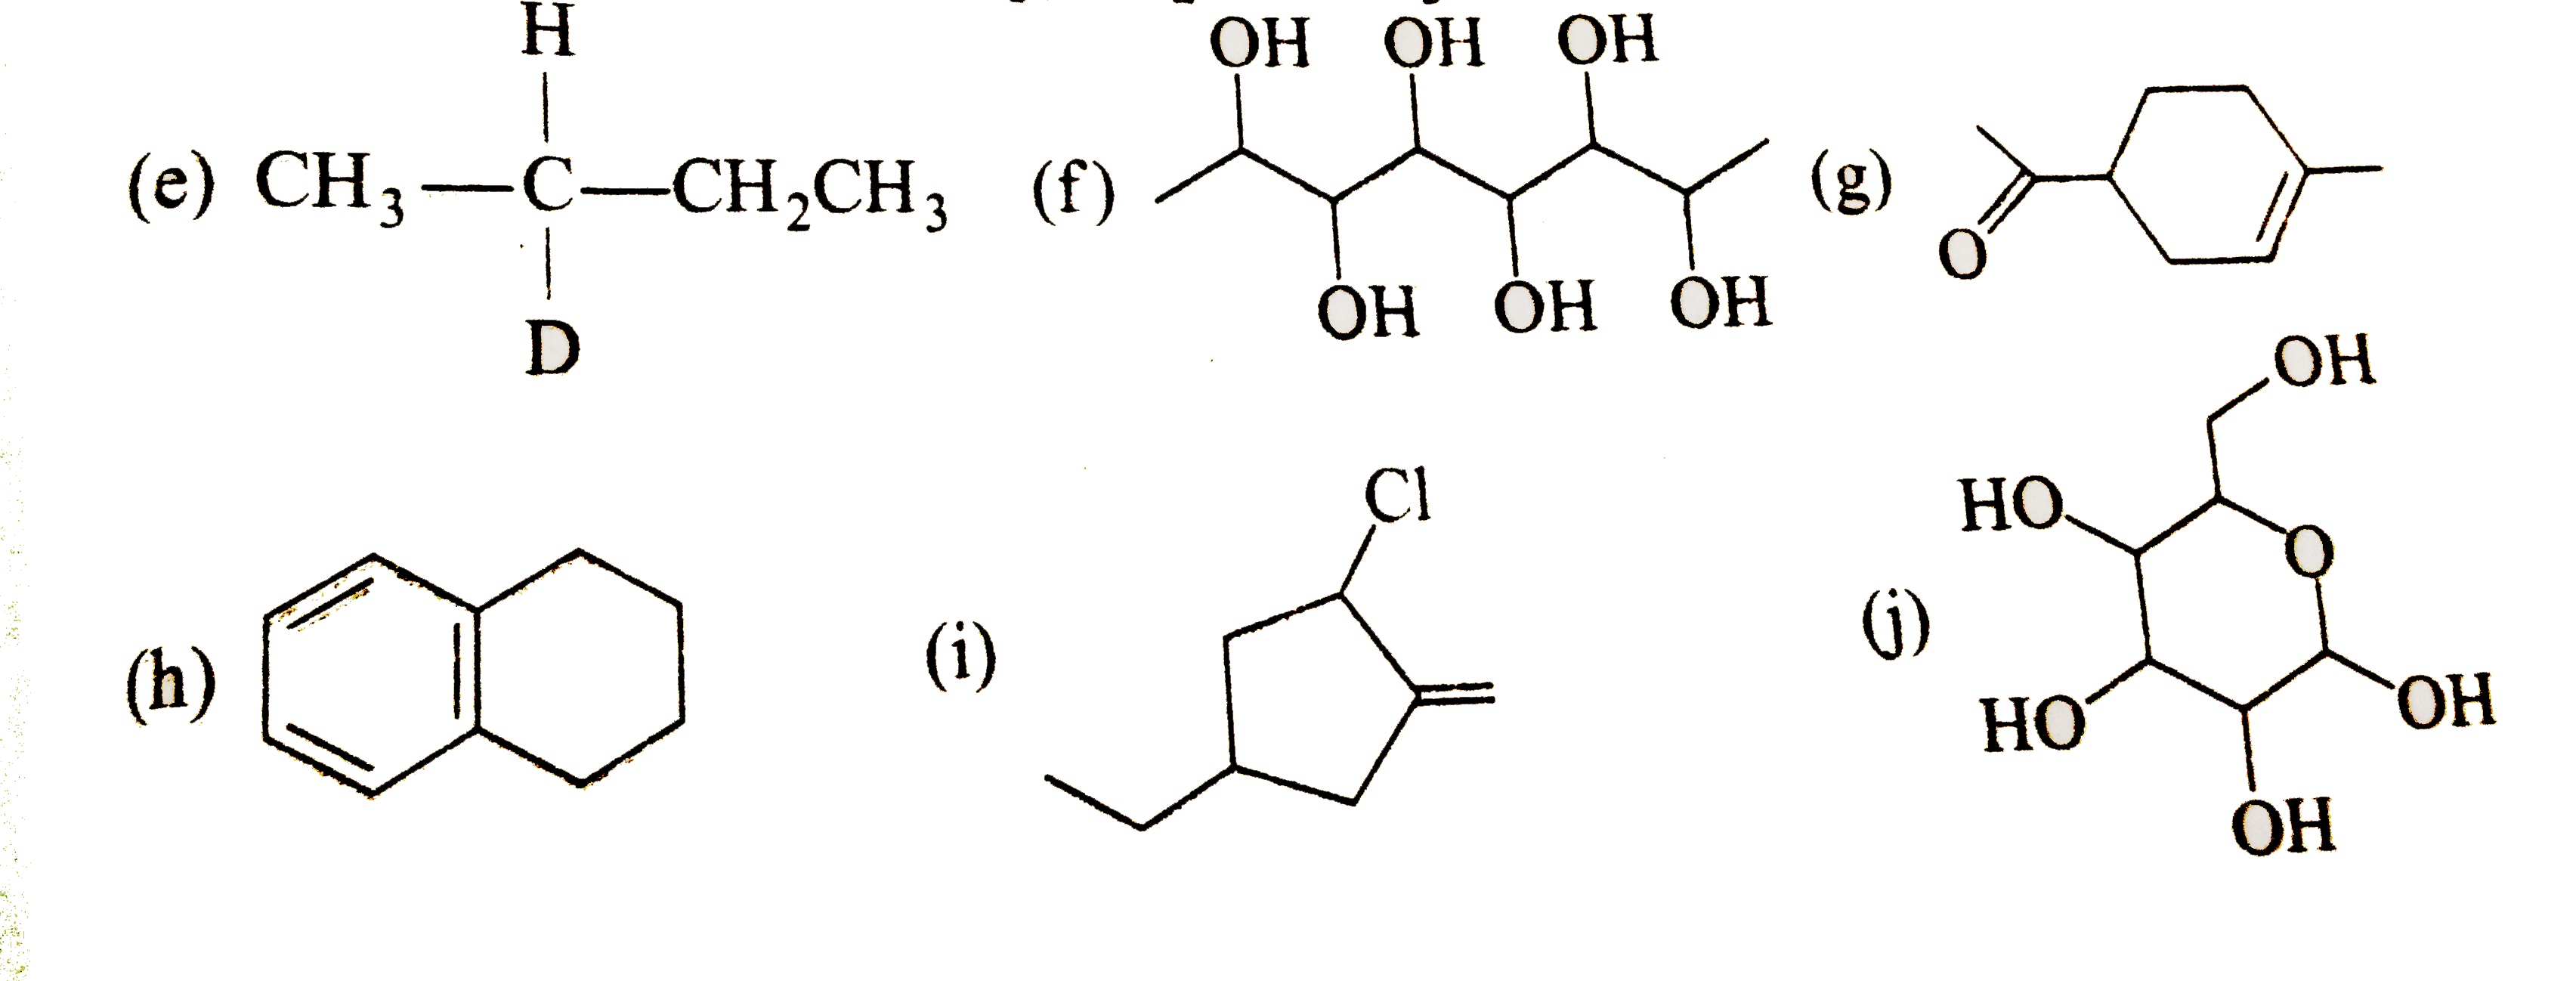 Locate the sterogenic center (s) in each compound. A molecule may have zero, one or more sterogenic centers.   (a) CH(3)CH(2)CH(2)CH(2)CH(2)CH(3)   (b)CH(3)CH(2)OCH(CH(3))CH(2)CH(3)   ( c) (CH(3))(2)CHCH(OH)CH(CH(3))(2)   (d)(CH(3))(2)CHCH(2)CH(CH(3))CH(2)CH(CH(3))CH(CH(3))CH(2)CH(3)